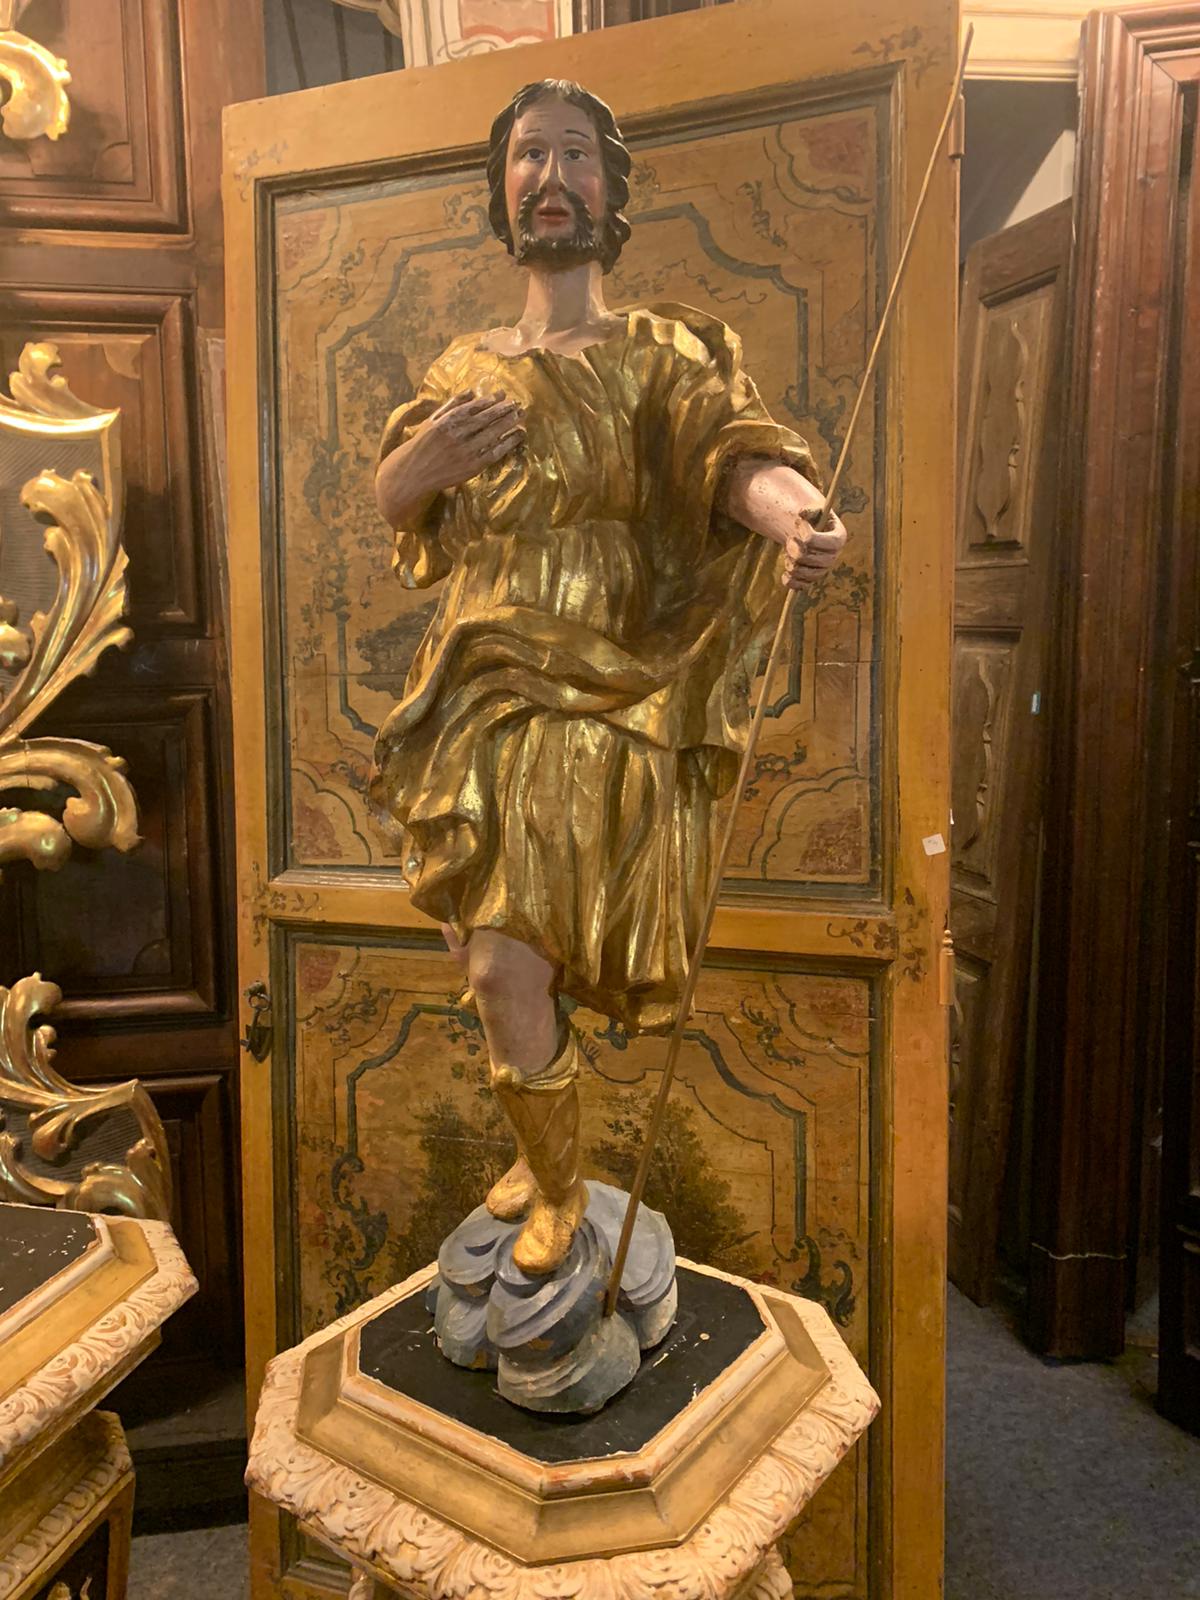 Ancient wooden statue, hand-carved depicting a devotee, with hand-made polychrome and gilded lacquering, built in the late 1700s for a church in Italy.

Size cm W 45 x H 97 x T 27.